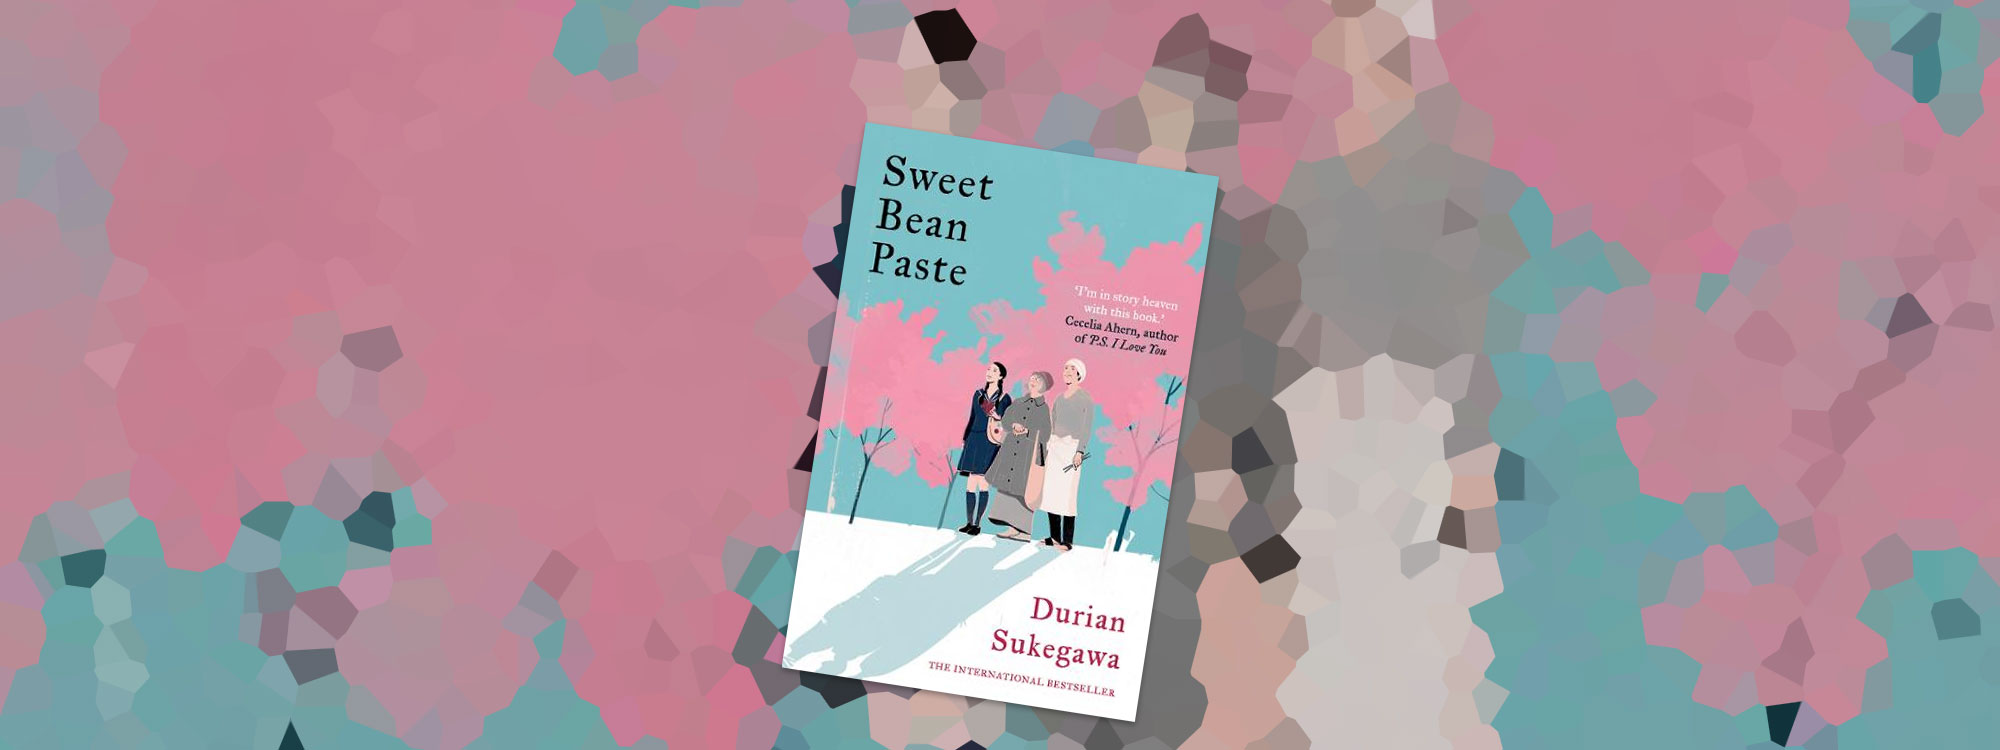 Sweet Bean Paste by Durian Sukegawa Book Cover